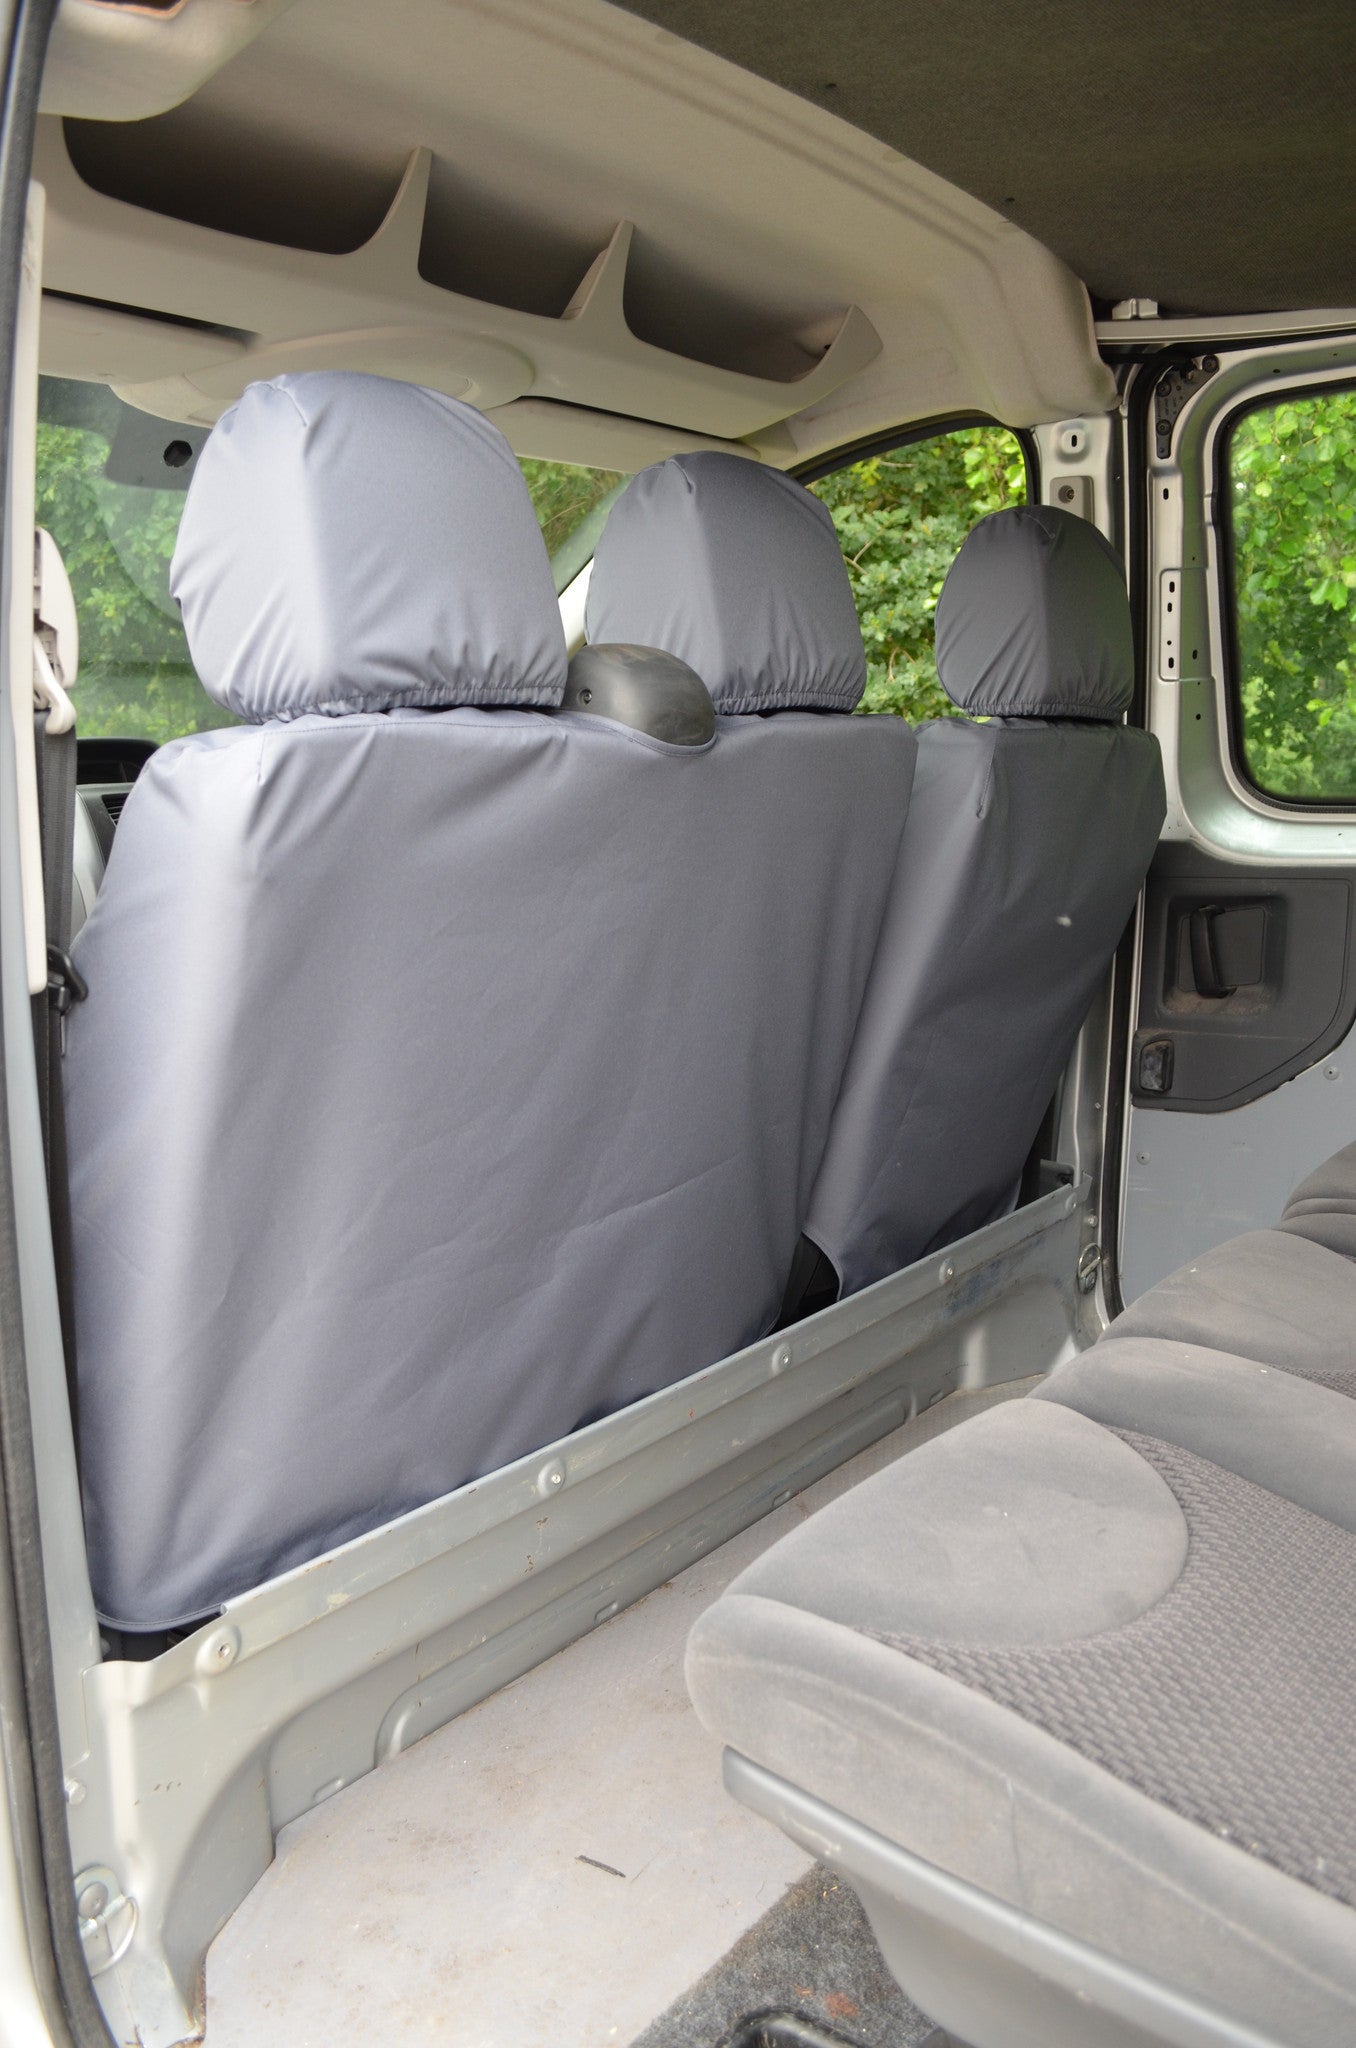 Fiat Scudo Van 2007 - 2016 Tailored Front Seat Covers  Turtle Covers Ltd